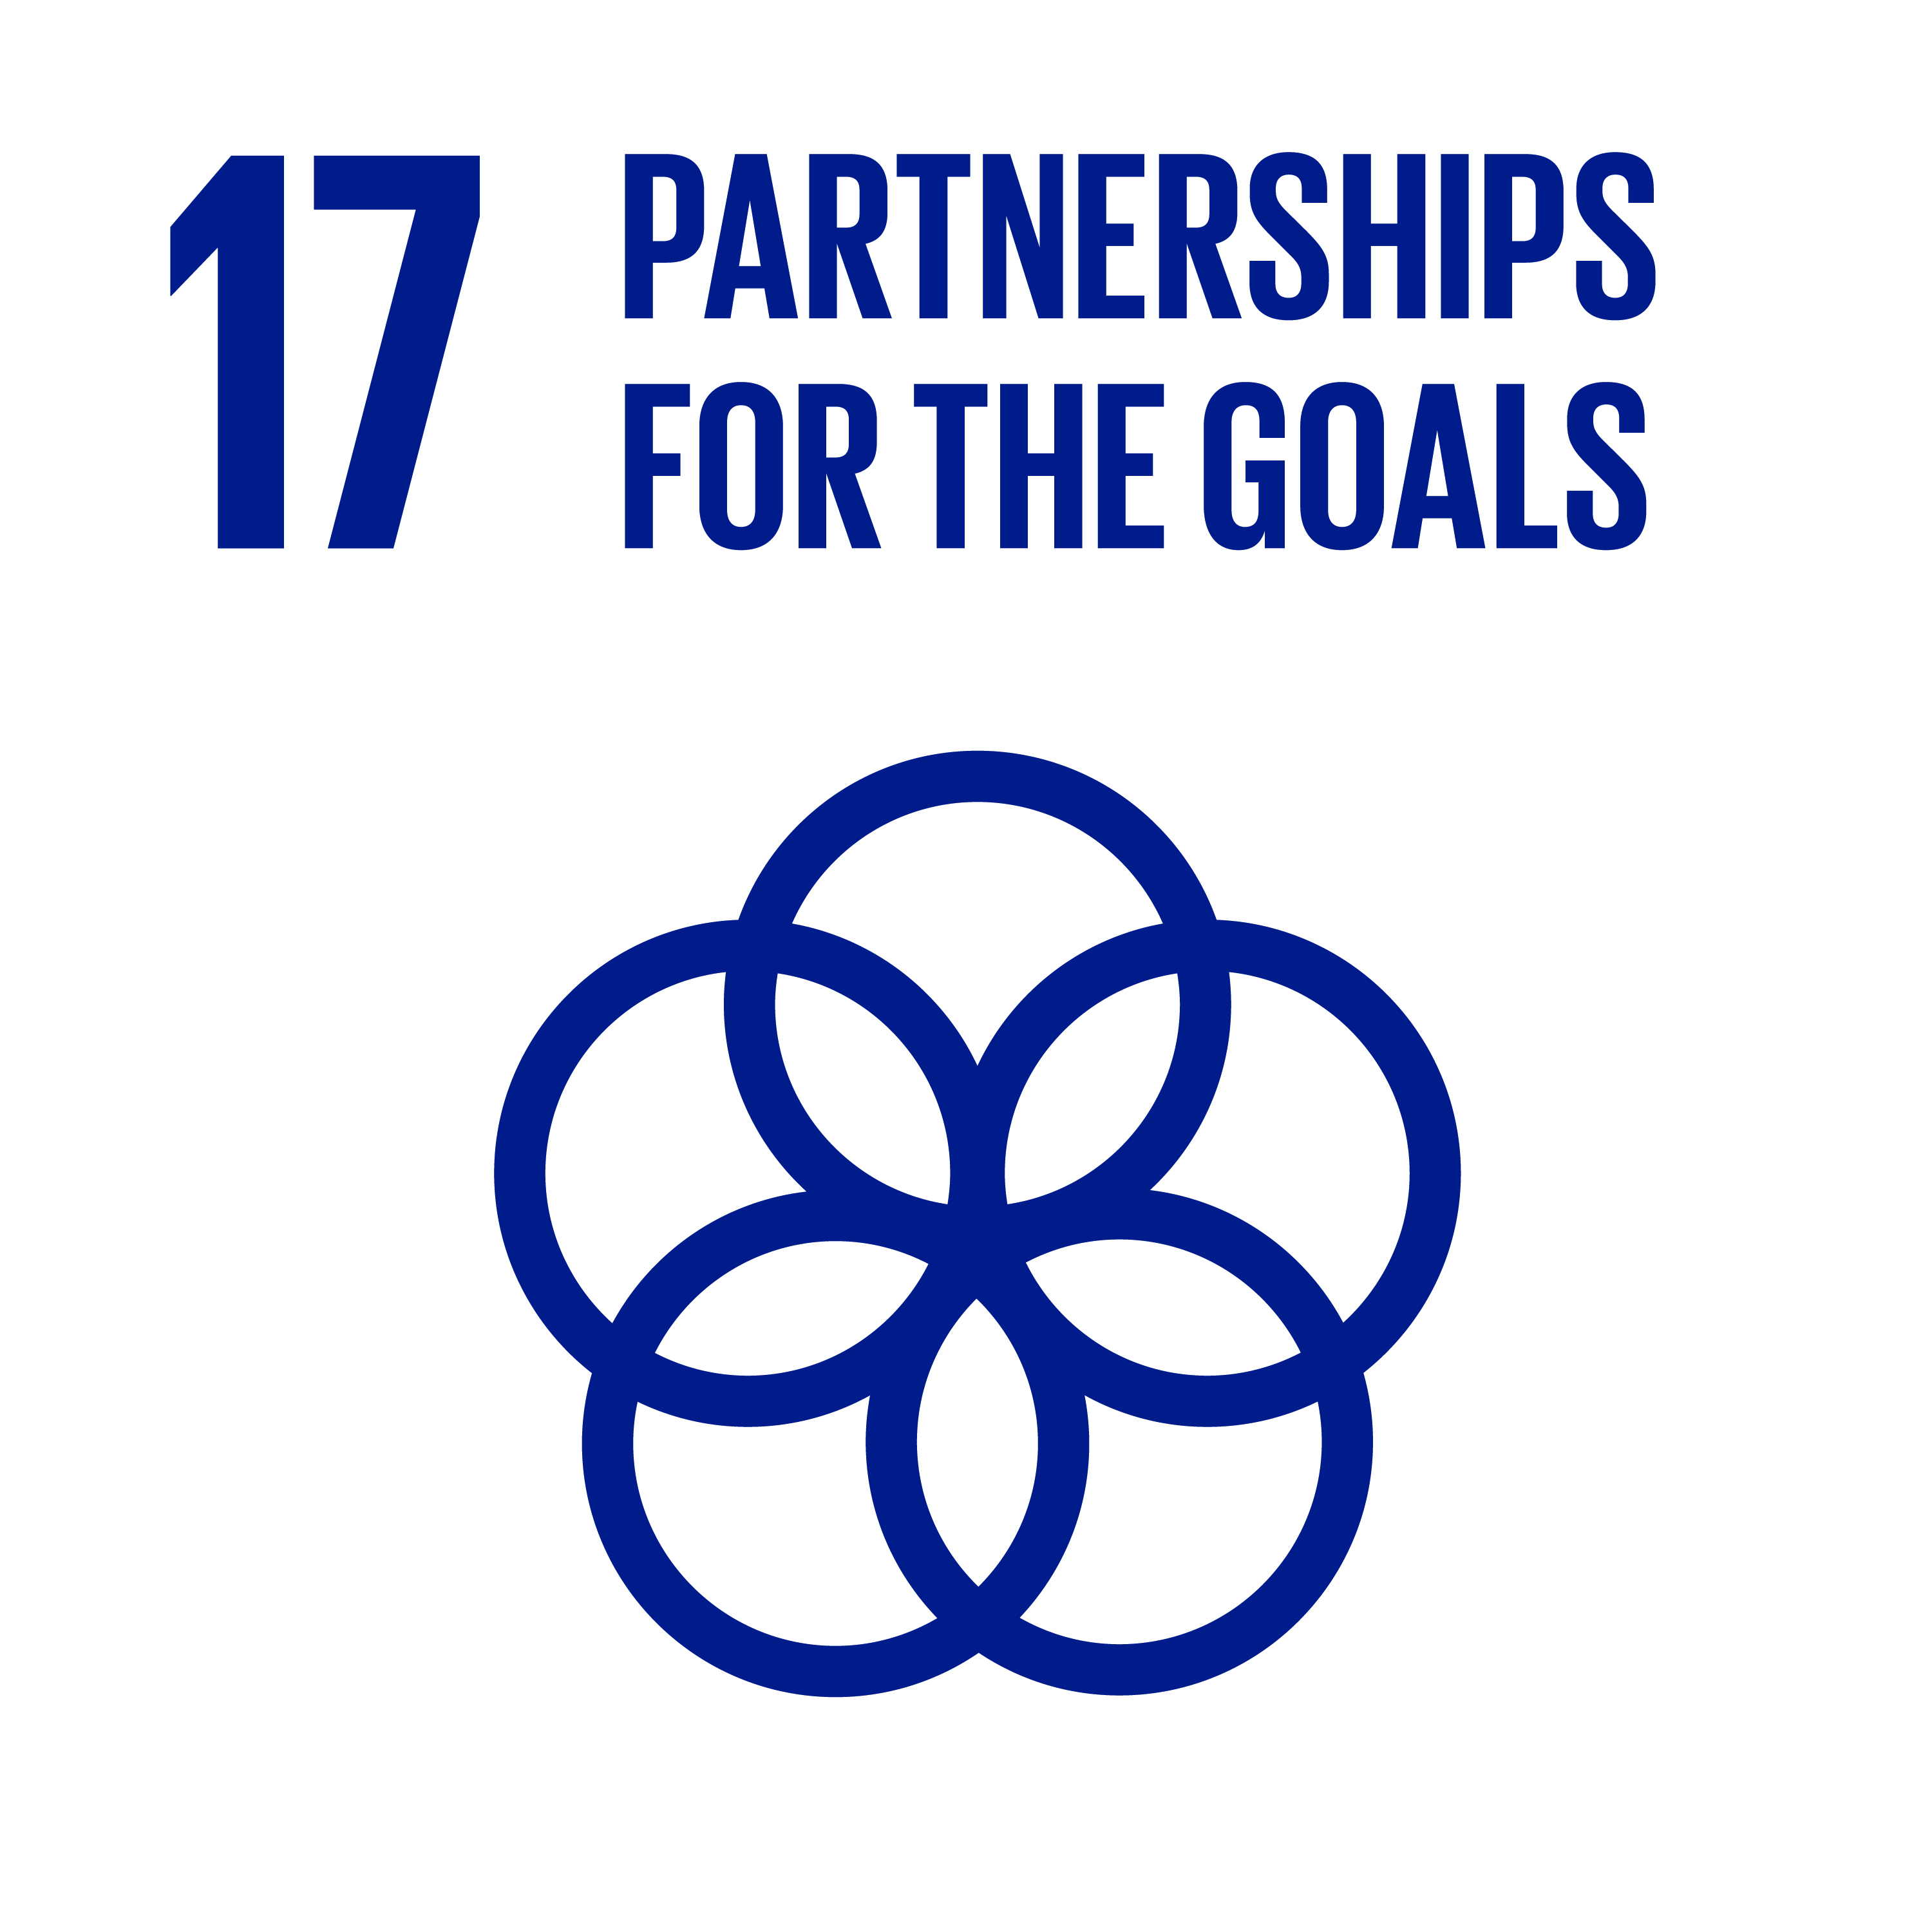 Sustainable development goals: Partnerships for the goals